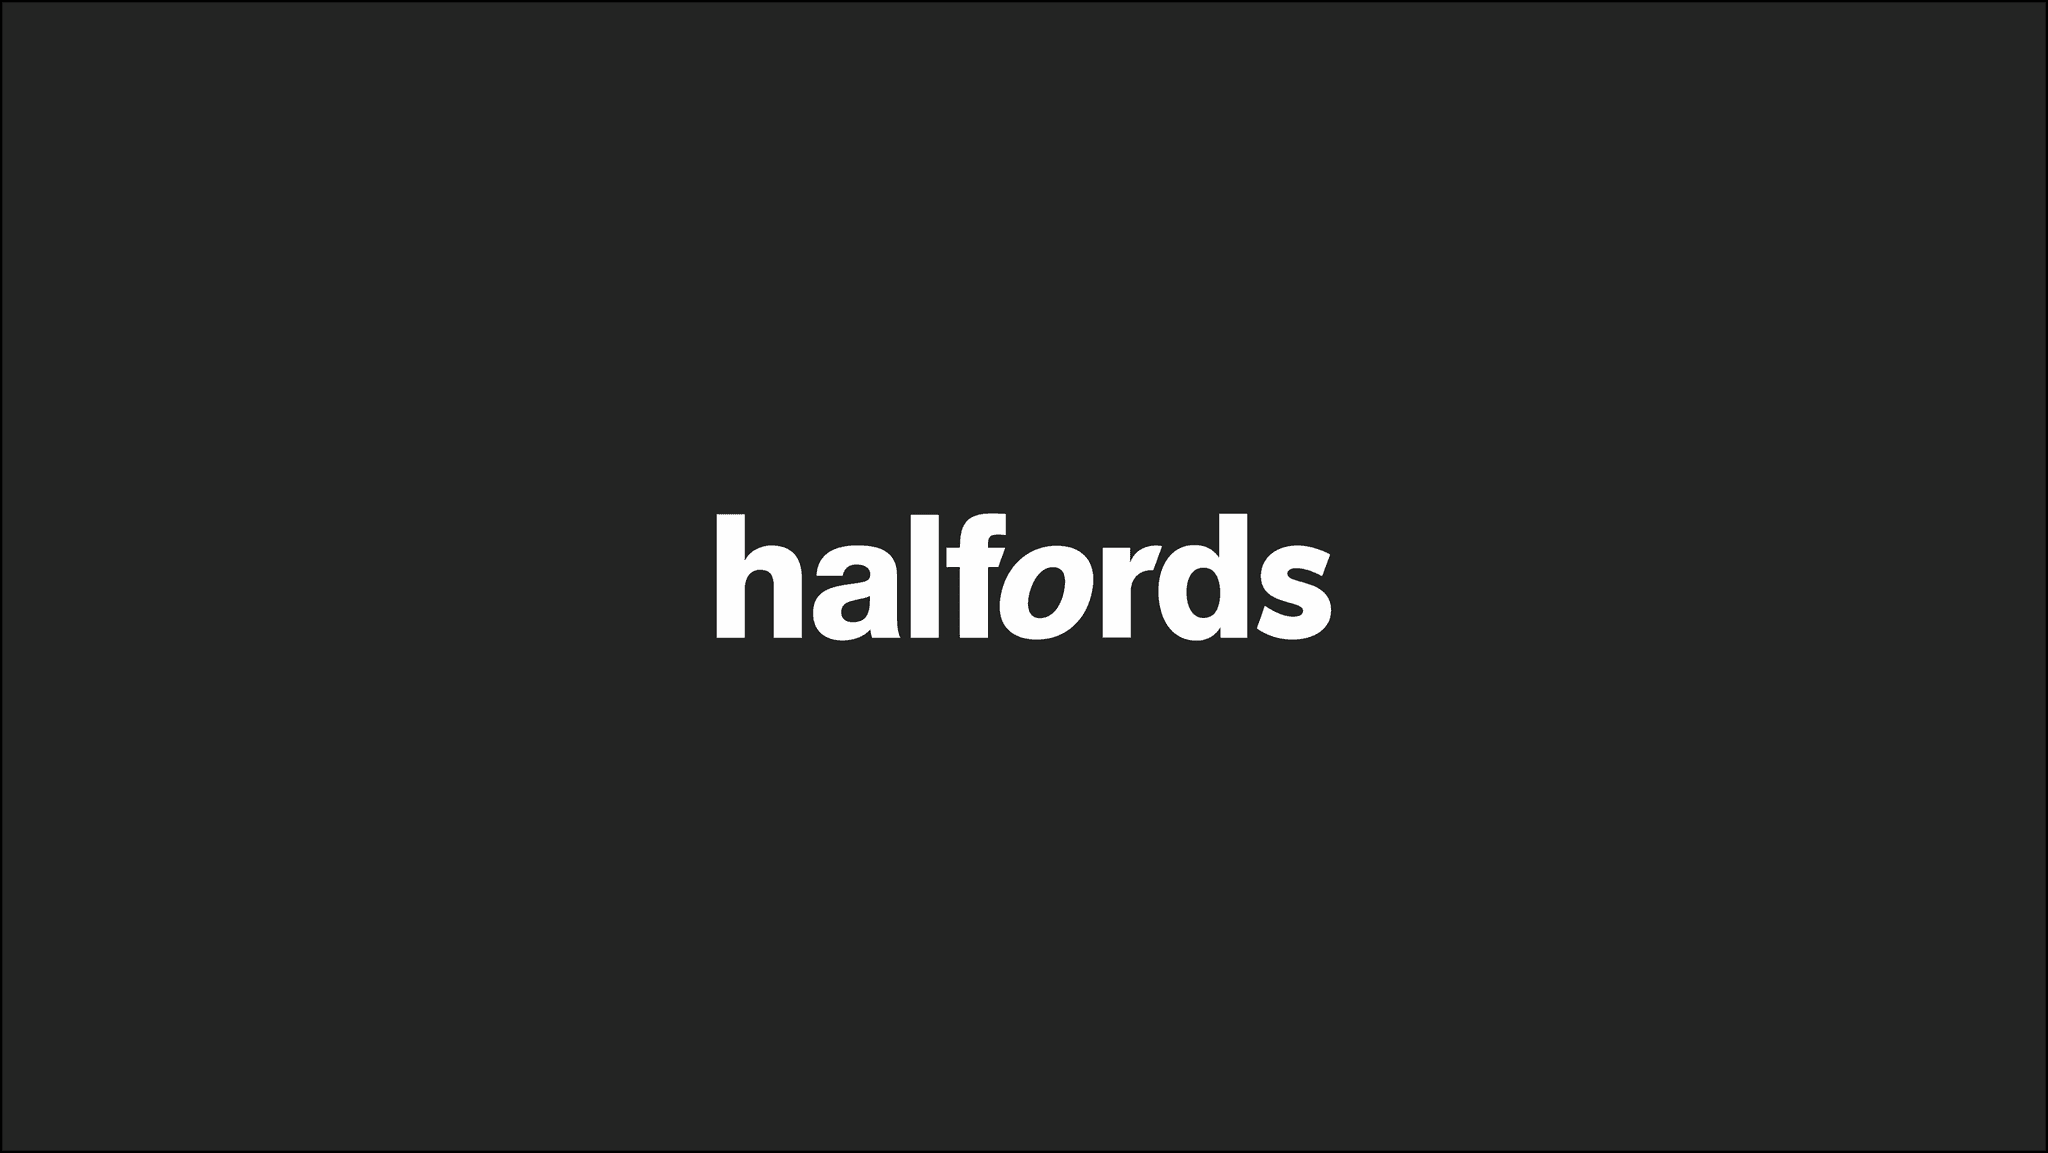 Up to 20% Halfords Camping